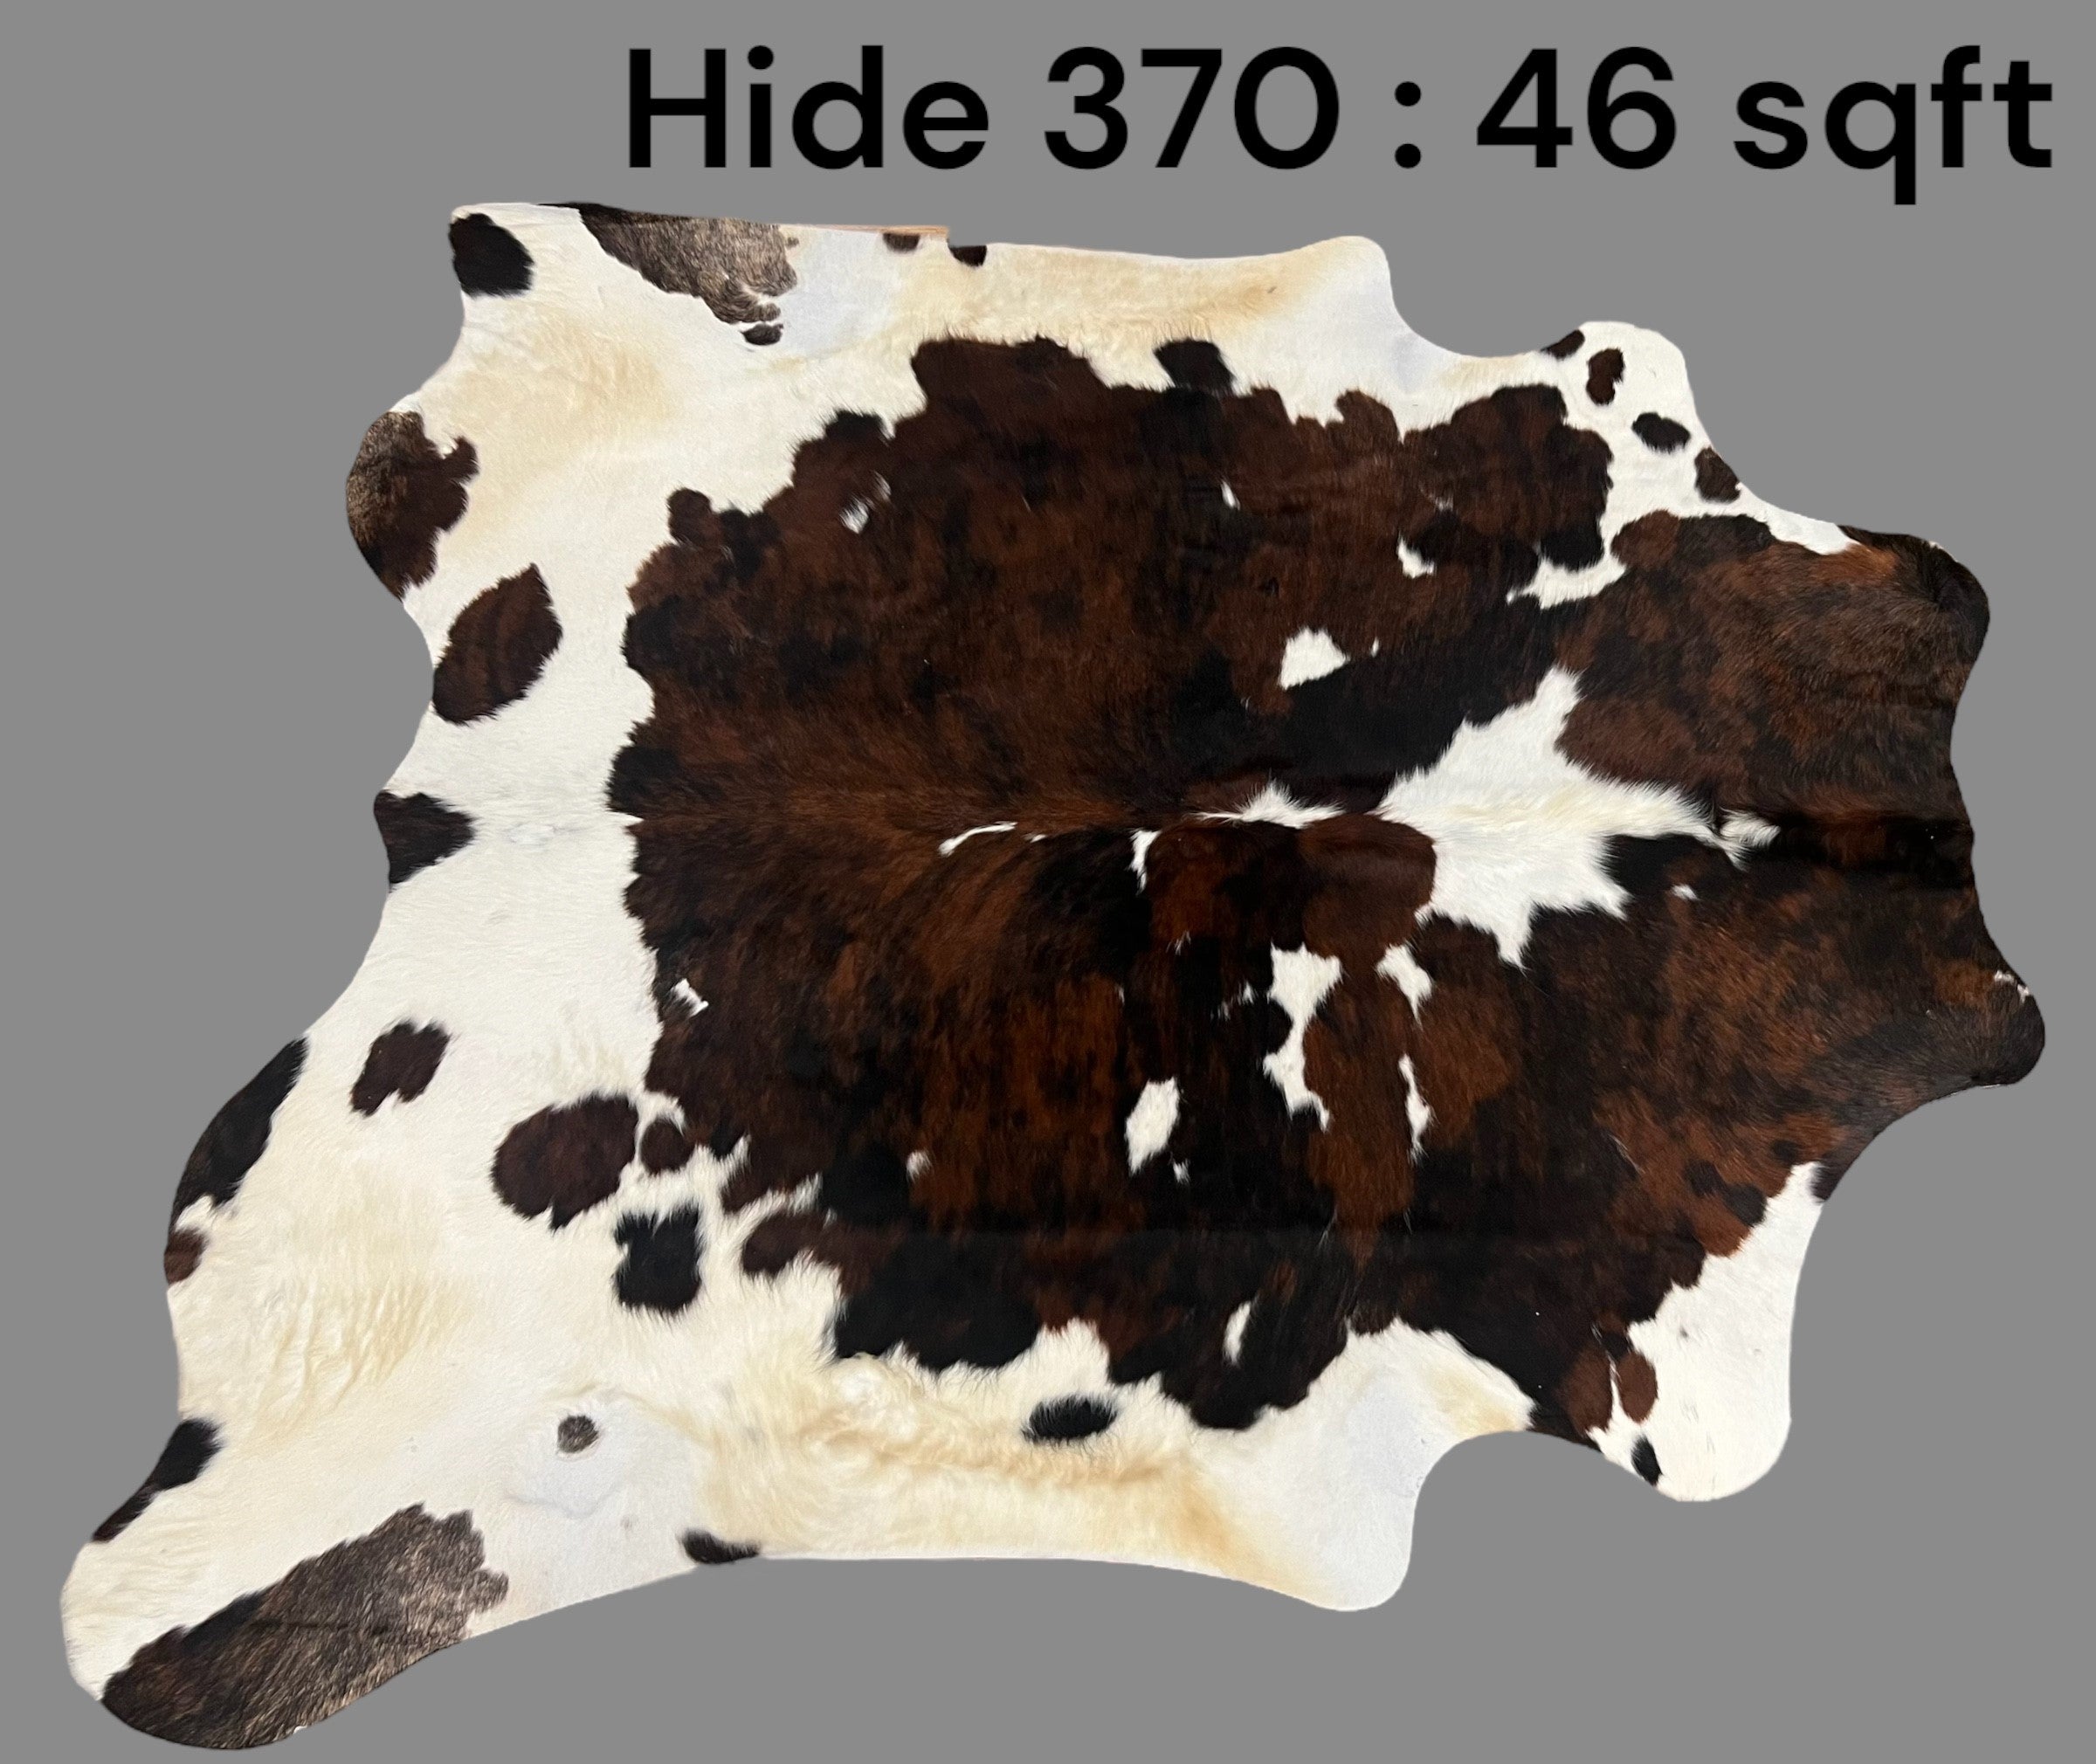 Natural Hair On Cow Hide : This Hide Is Perfect For Wall Hanging, Leather Rugs, Leather Upholstery & Leather Accessories. (Hide370)